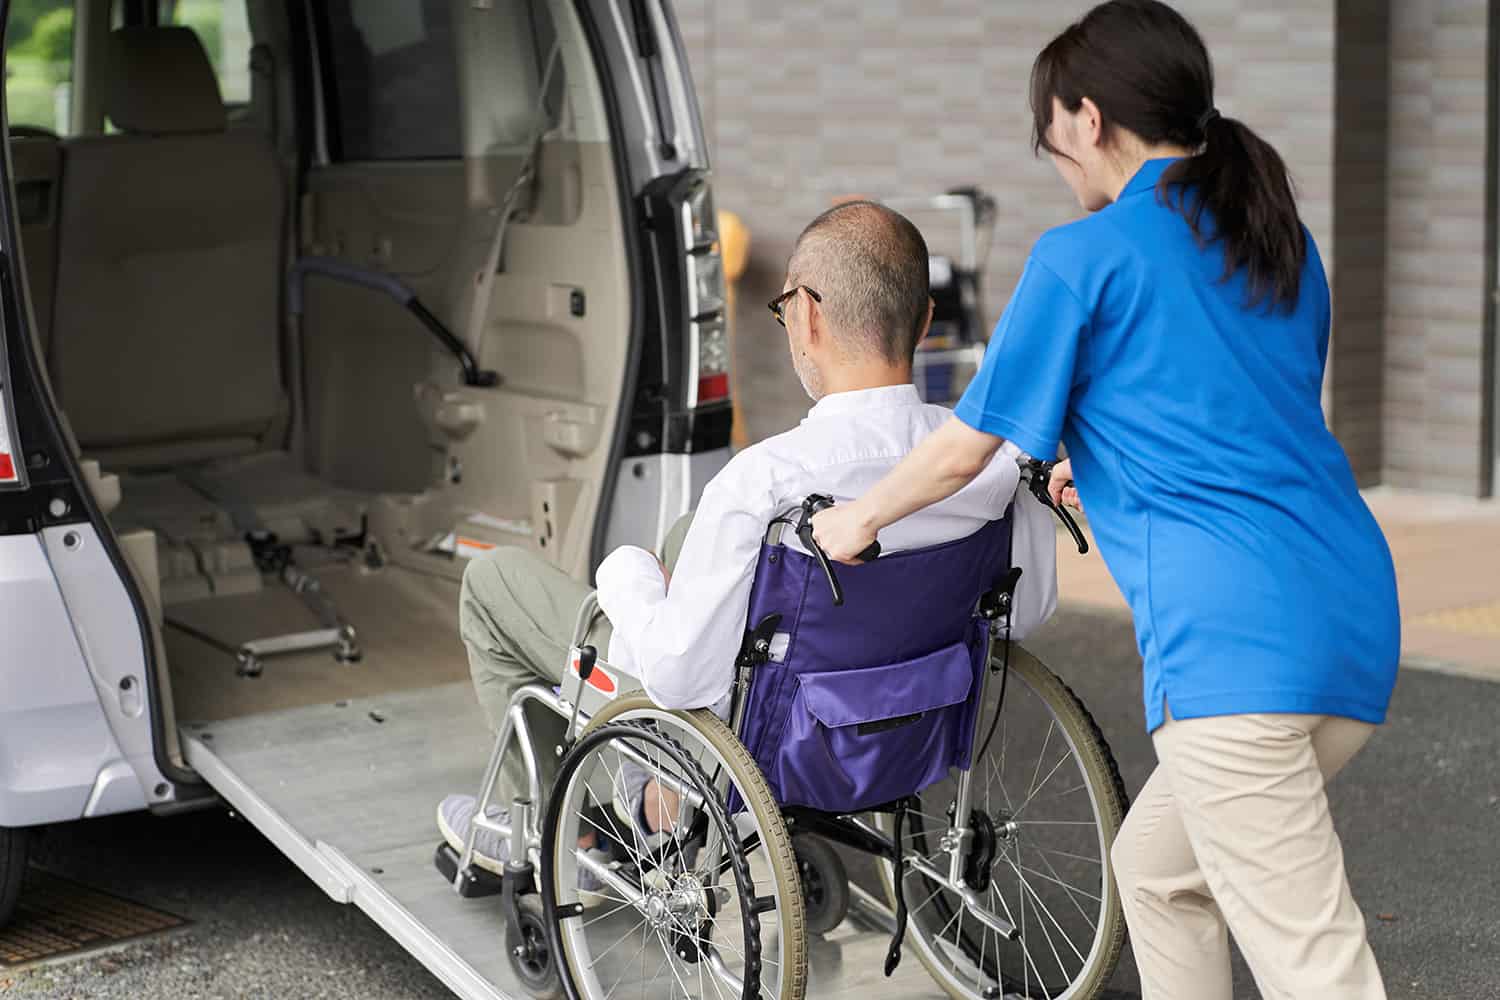 Patient being transported into a handicap accessible van by a caregiver